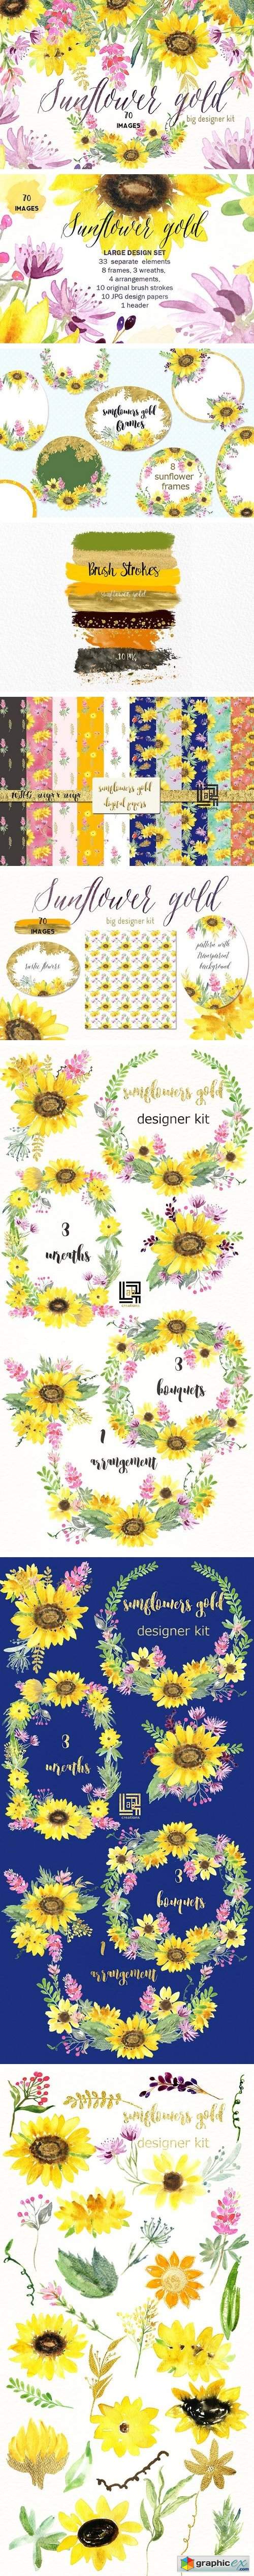 Sunflowers gold Watercolor clipart